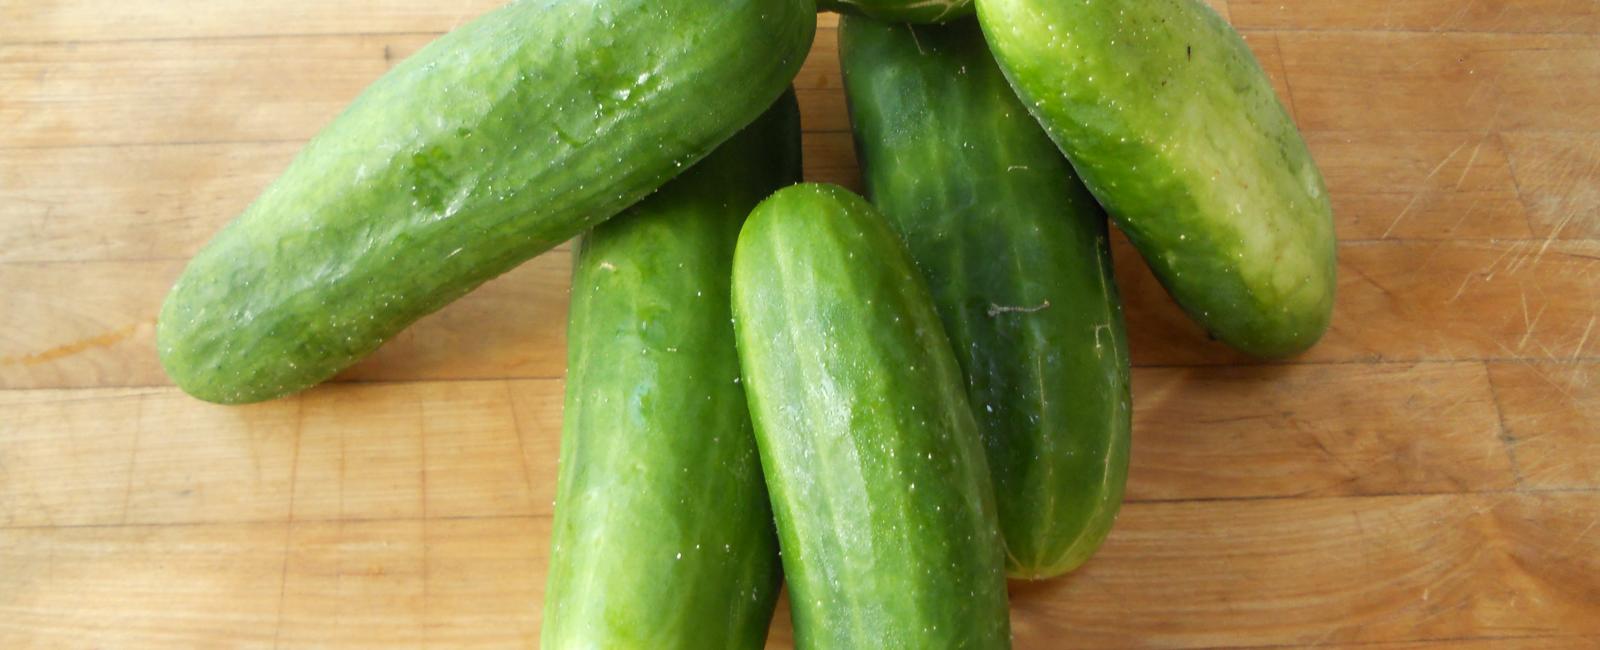 A cucumber is a fruit